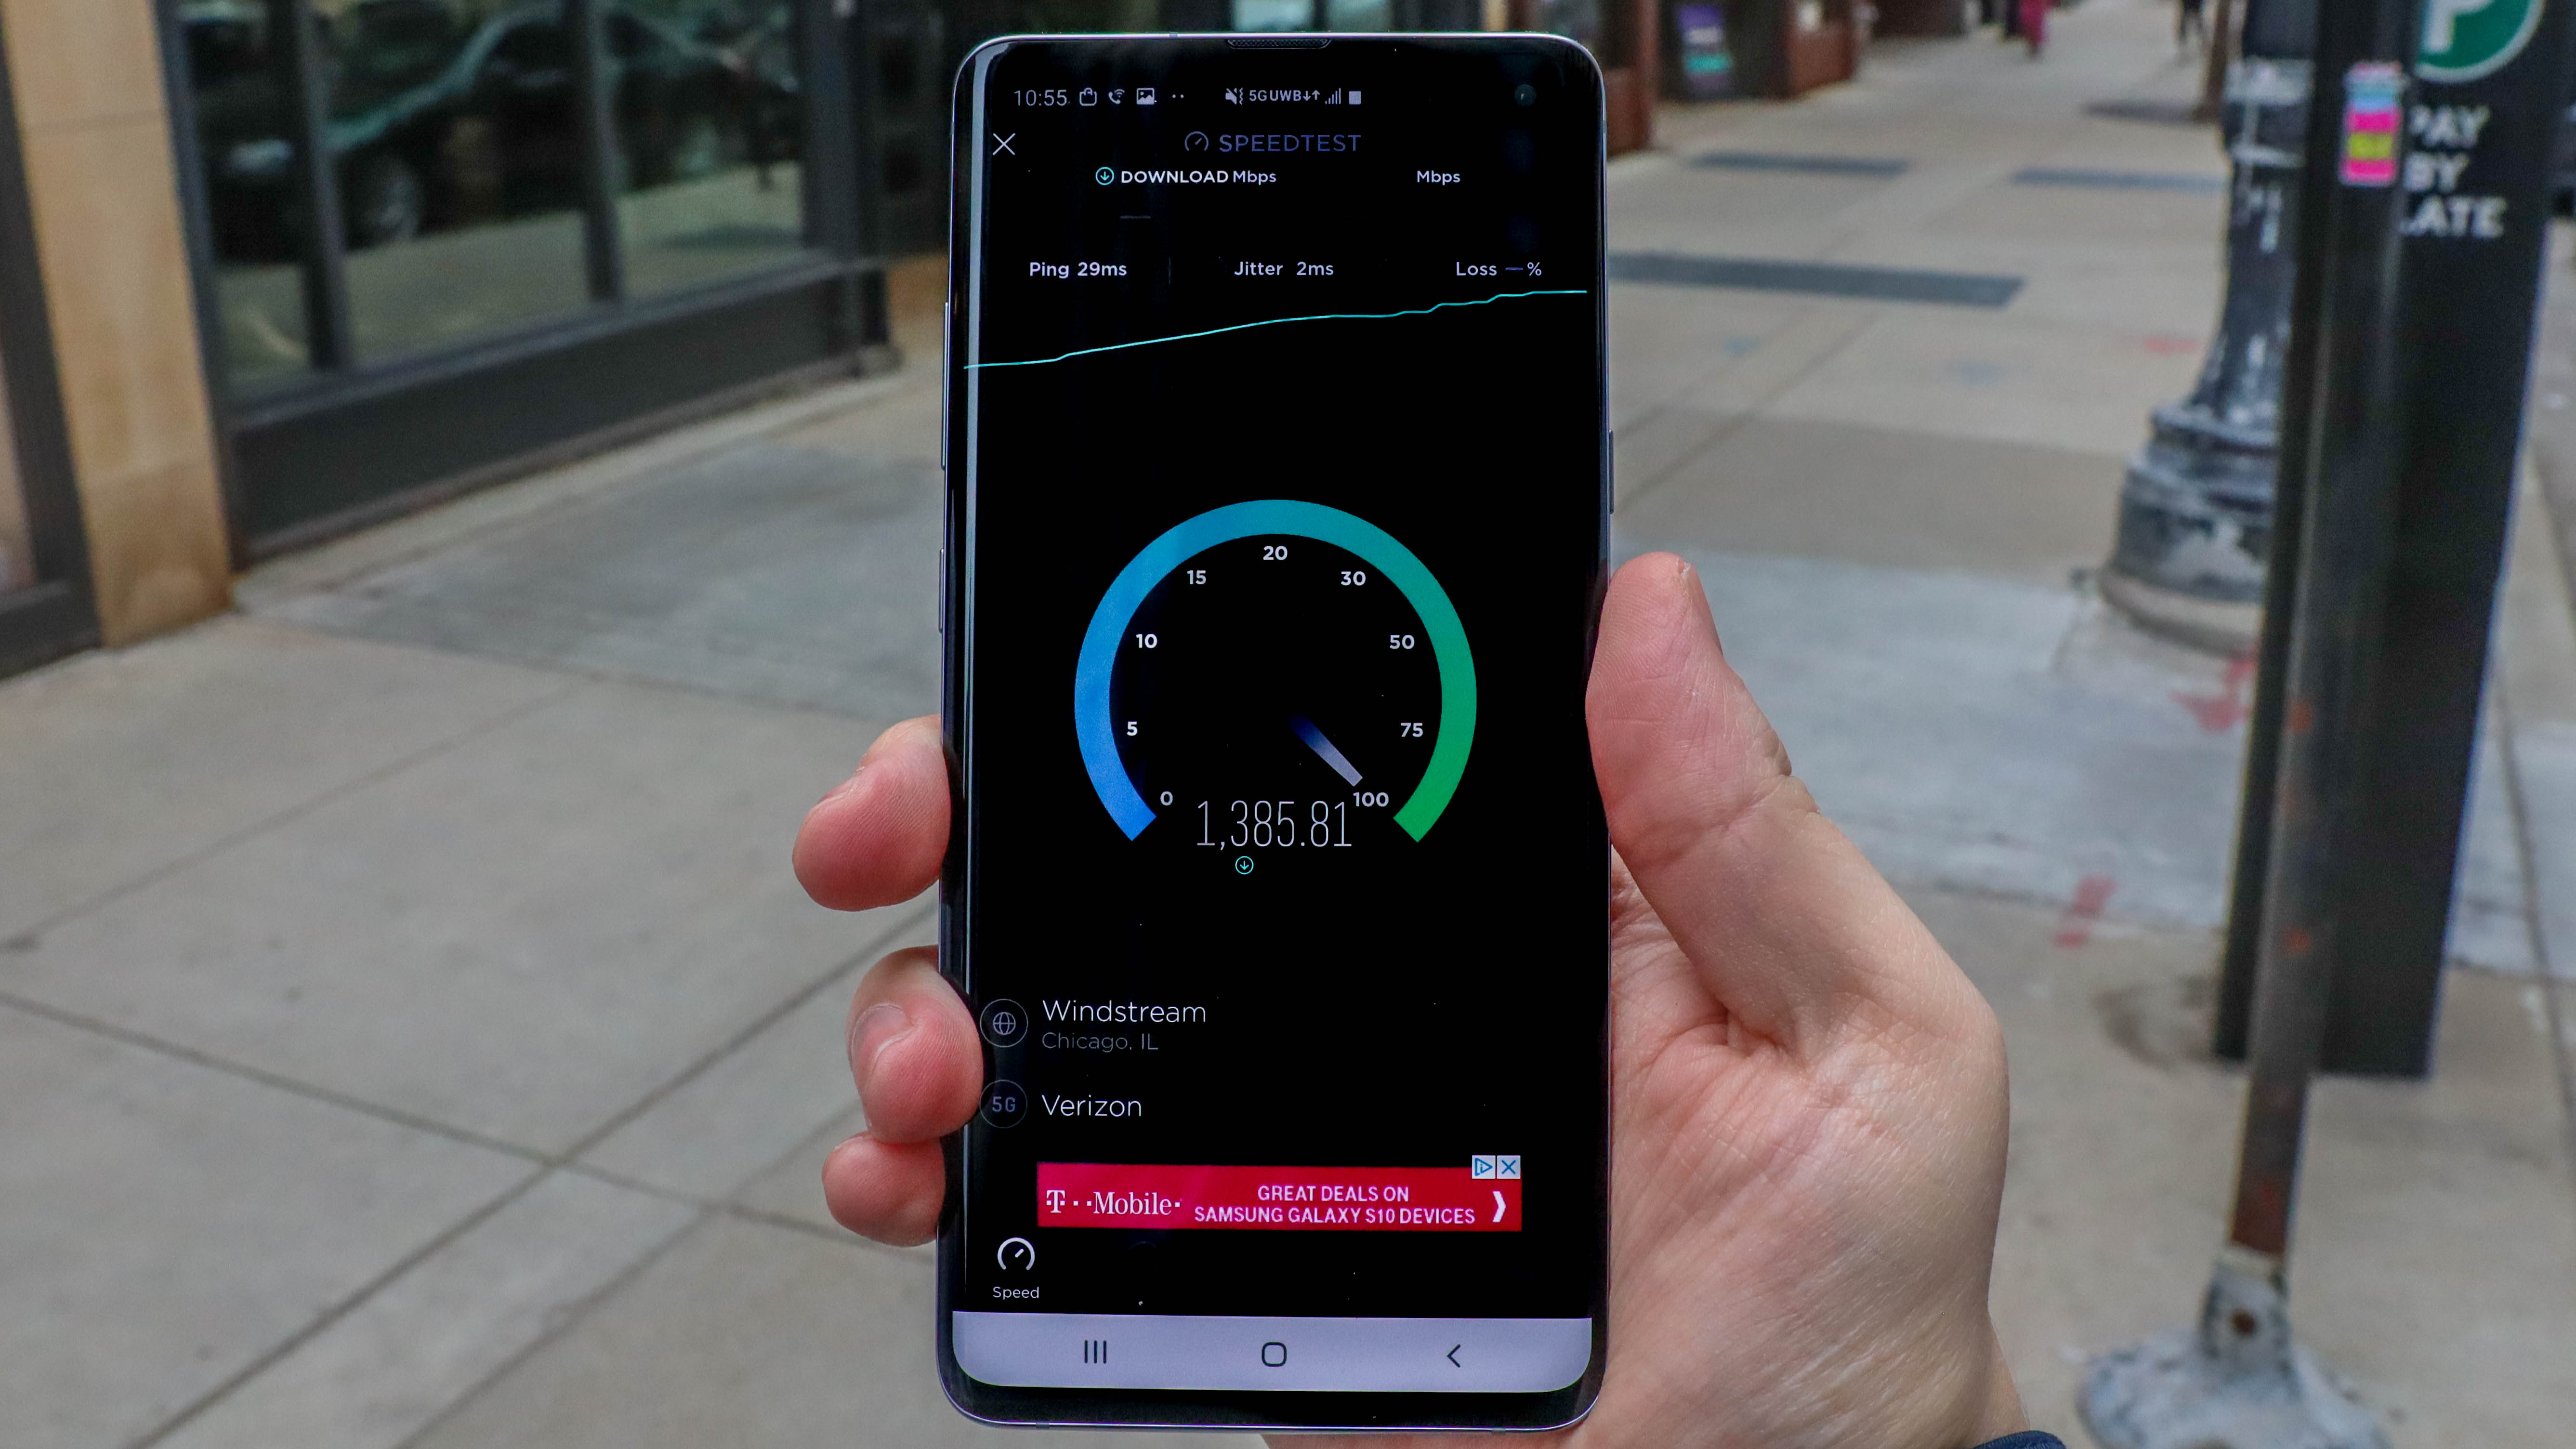 OnePlus 7 Pro 5G In The Wild: Testing Sprint S NYC 5G Network